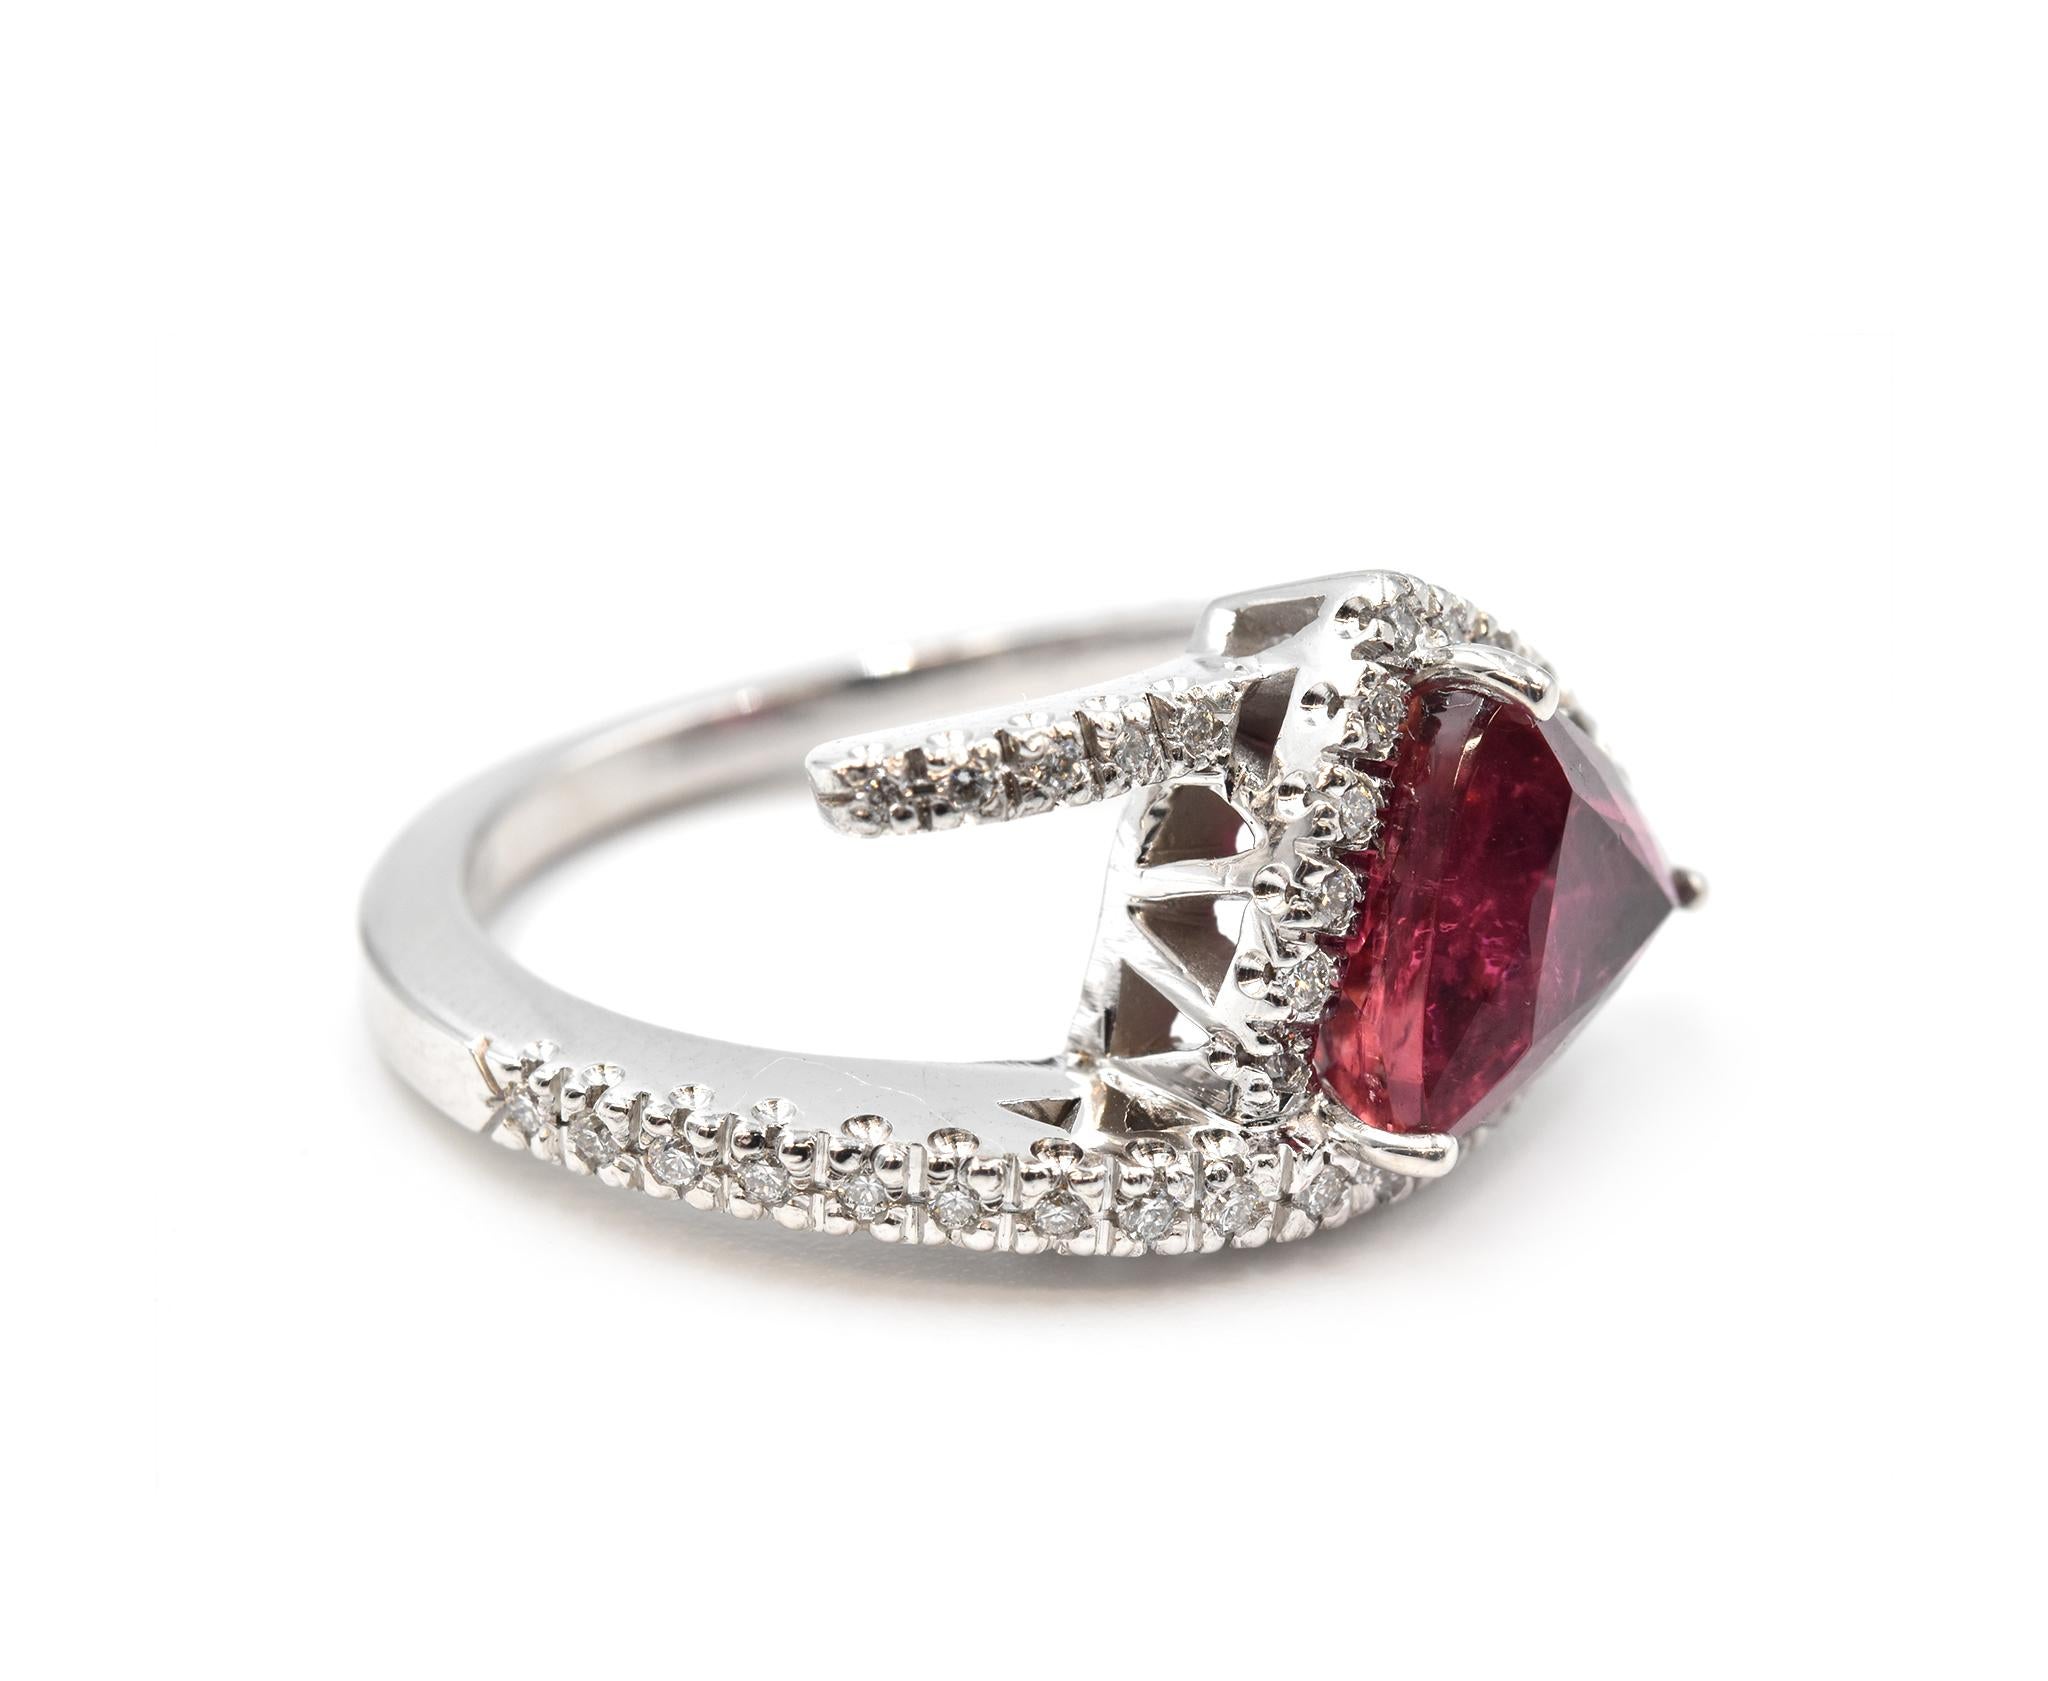 Designer: custom design
Material: 14k white gold
Rubellite: one trilliant cut 2.94 carat
Diamonds: 41 round cut = 0.39 carat weight
Color: H
Clarity: SI1
Ring Size: 7 (please allow two additional shipping days for sizing requests) 
Dimensions: ring